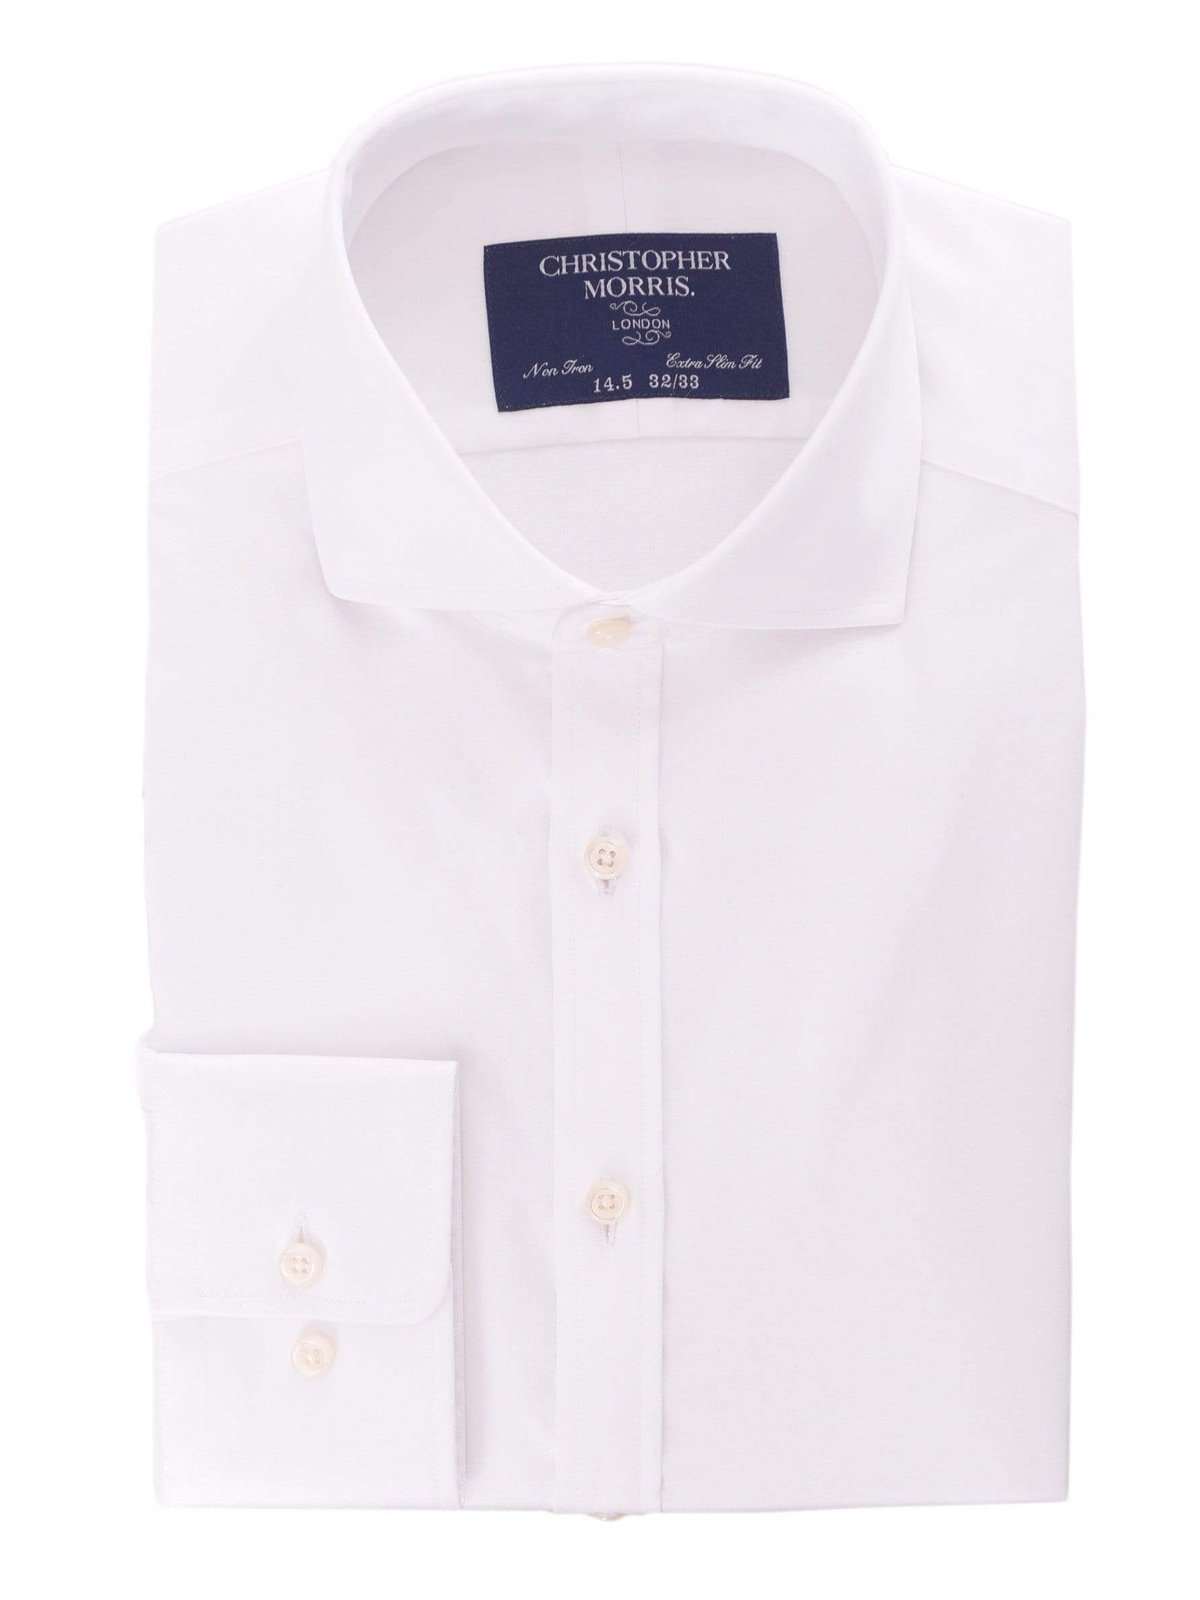 Christopher Morris SHIRTS 16 1/2 34/35 Mens Extra Slim Fit Solid White Twill Spread Collar Non Iron Cotton Dress Shirt